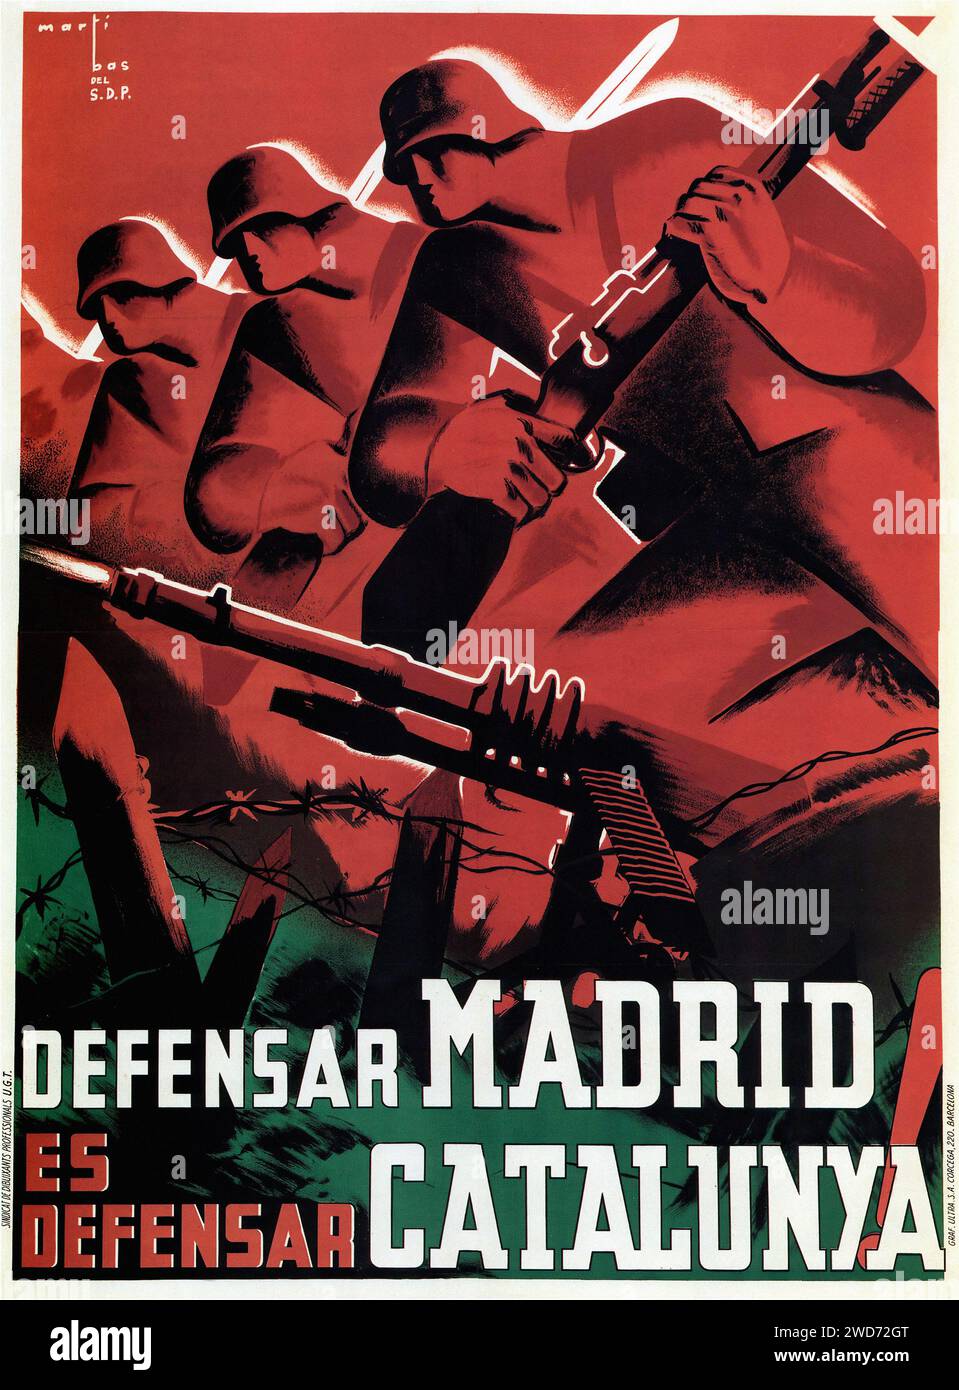 '  Defender Madrid es defender Cataluña.' '  Defending Madrid is defending Catalonia.' The image is a 1937 propaganda poster, with a focus on solidarity between Madrid and Catalonia. It shows a row of soldiers in silhouette against a red backdrop, with rifles poised for action. The poster's style is reminiscent of the socialist realism movement, with its focus on the collective struggle and militaristic themes. The design is stark and impactful, utilizing the contrast of the red background and black silhouettes to command attention and communicate the message of unified defense. Keywords: - Sp Stock Photo